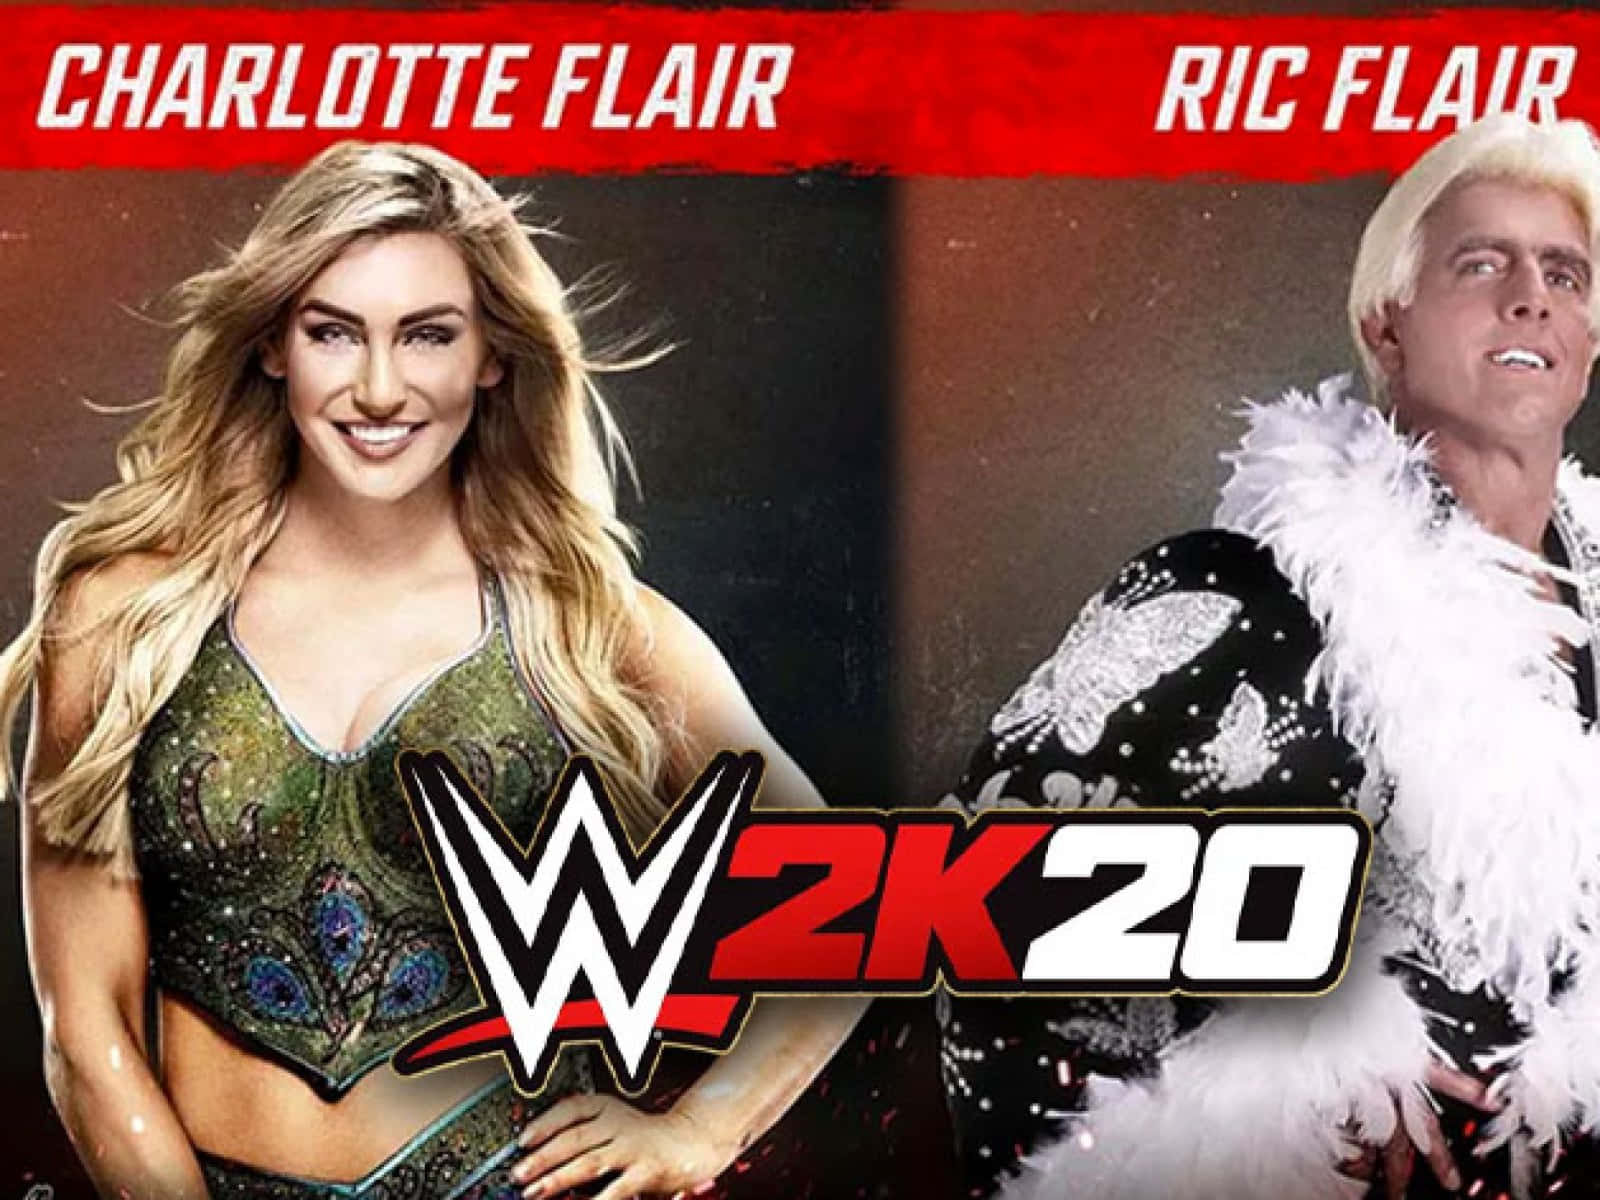 WWE Stars Mother Urges Charlotte Flair To Leave Opportunity For Others